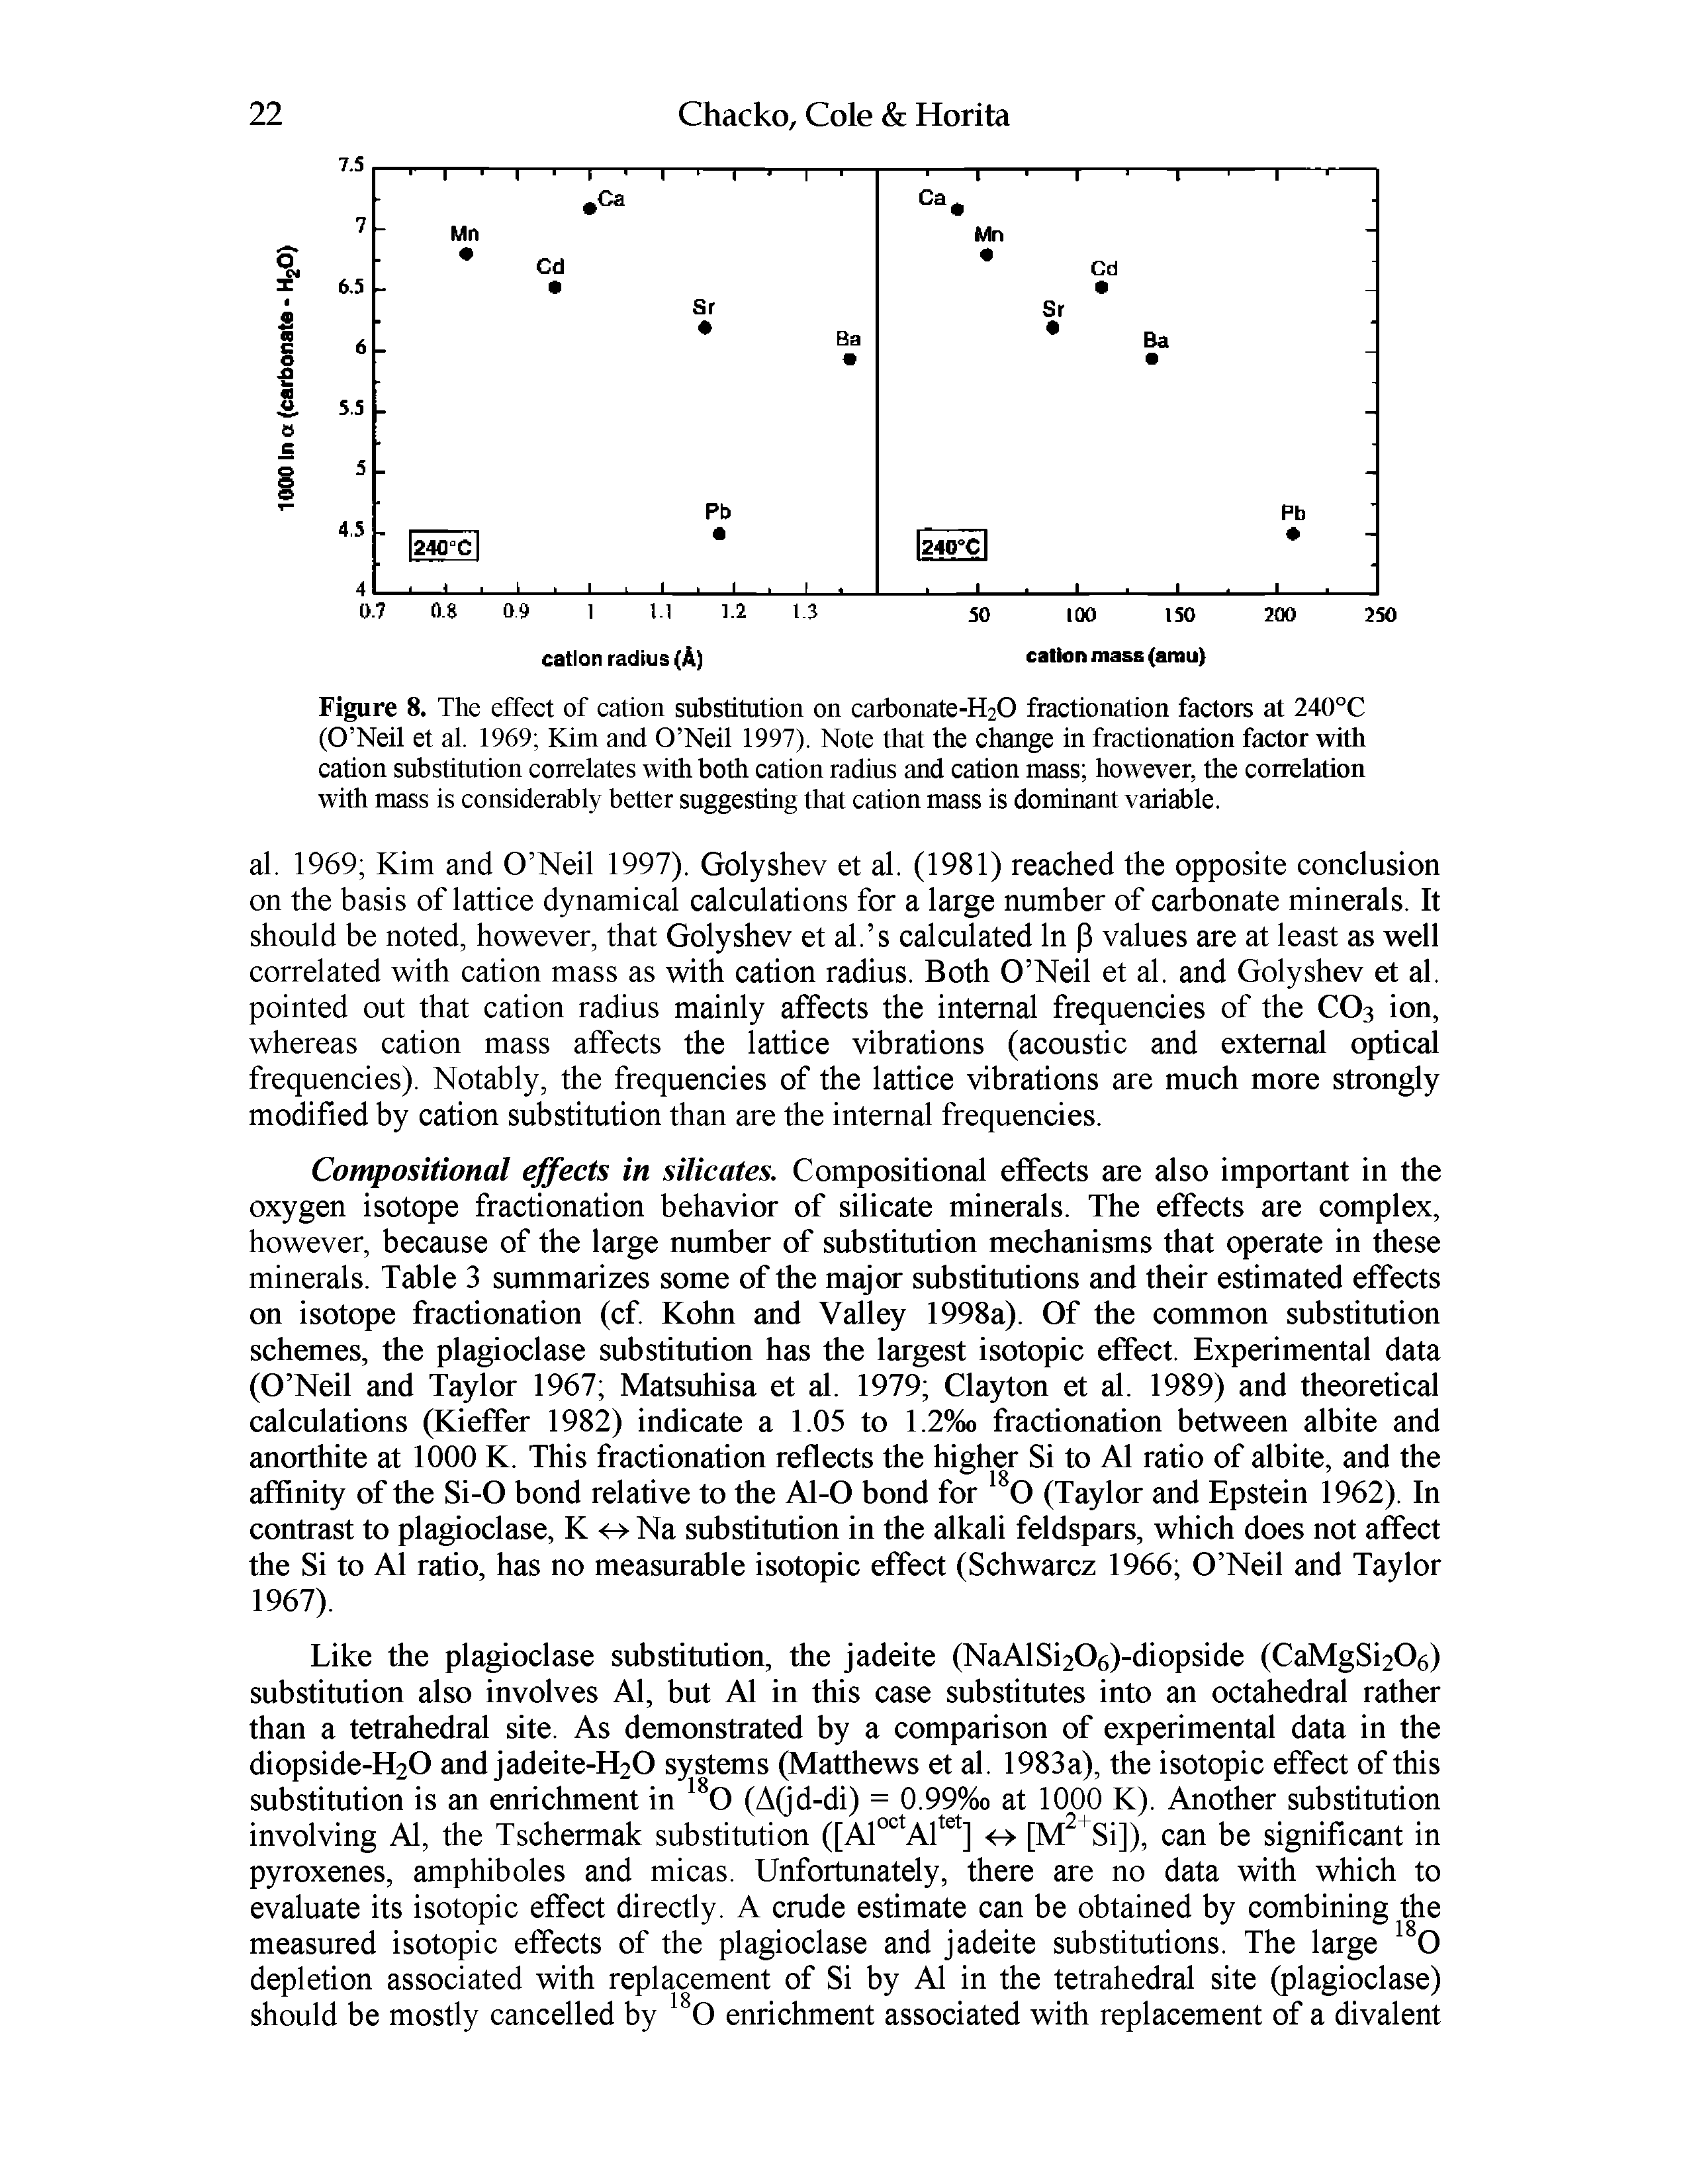 Figure 8. The effect of cation substitution on carbonate-H20 fractionation factors at 240°C (O Neil et al. 1969 Kim and O Neil 1997). Note that the change in fractionation factor with cation substitution correlates with both cation radius and cation mass however, the correlation with mass is considerably better suggesting that cation mass is dominant variable.